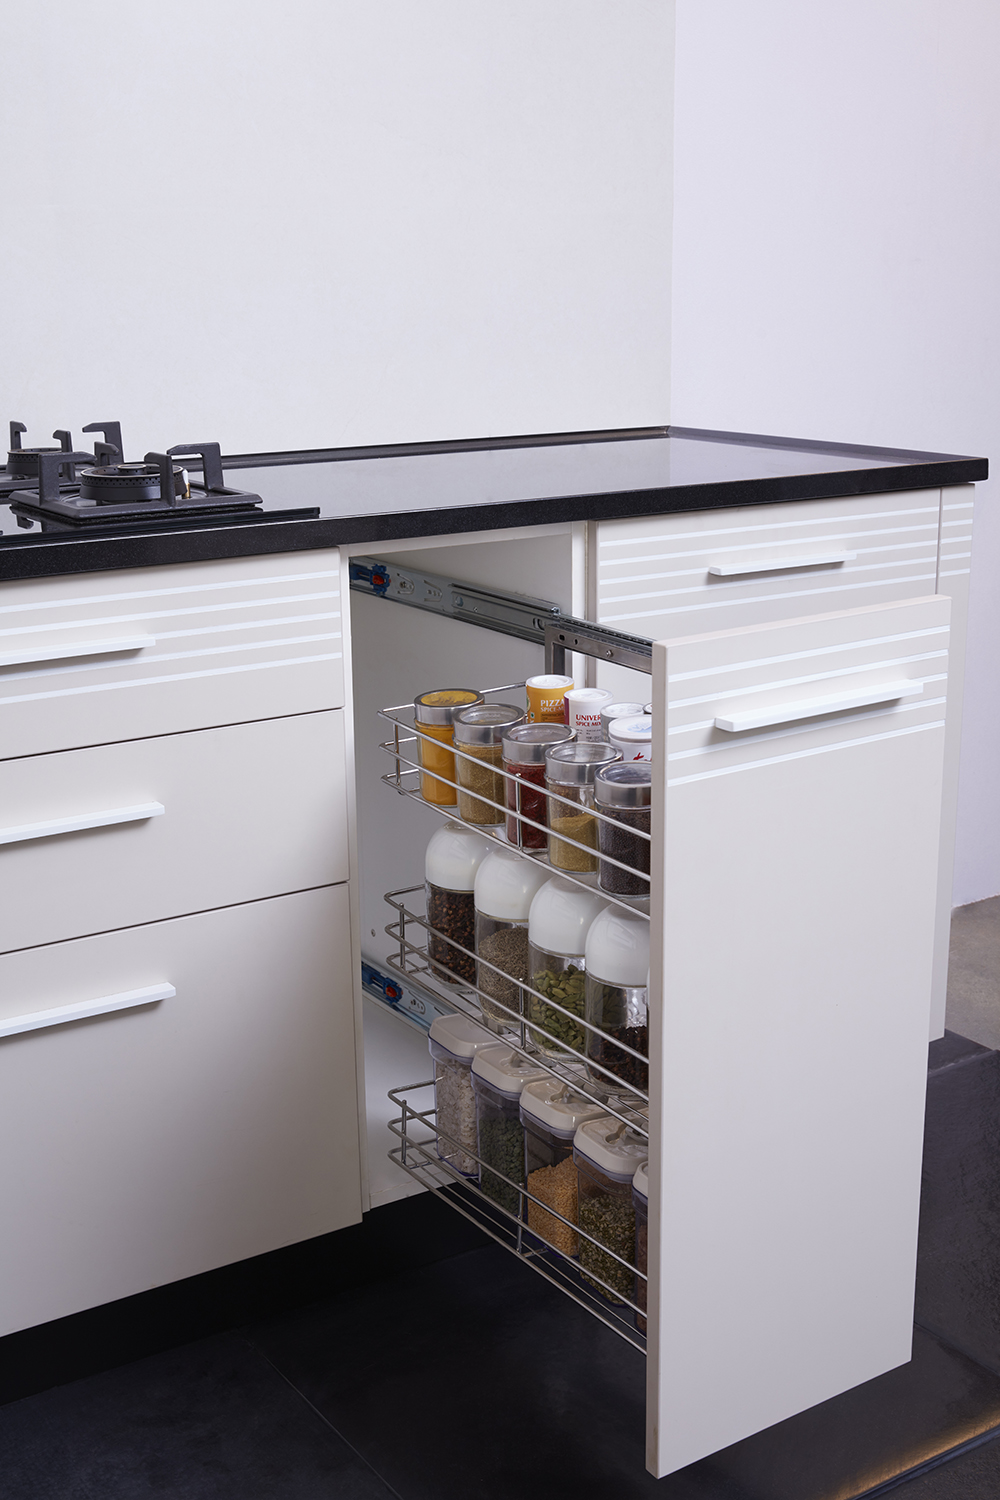 9 Ways In Which You Can Organize A Kitchen With Modular Fittings ArticleCube